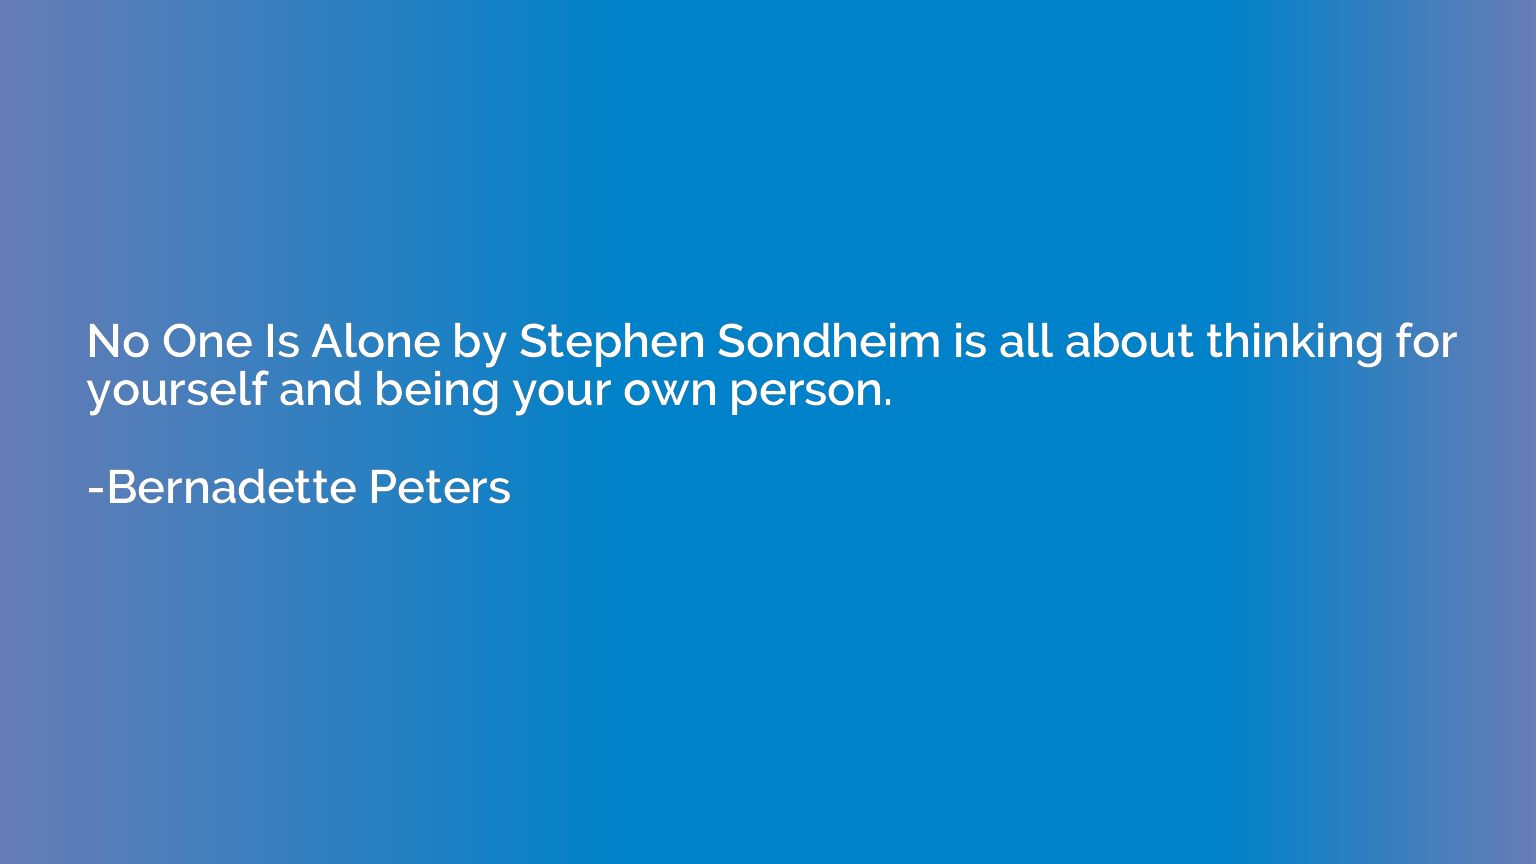 No One Is Alone by Stephen Sondheim is all about thinking fo